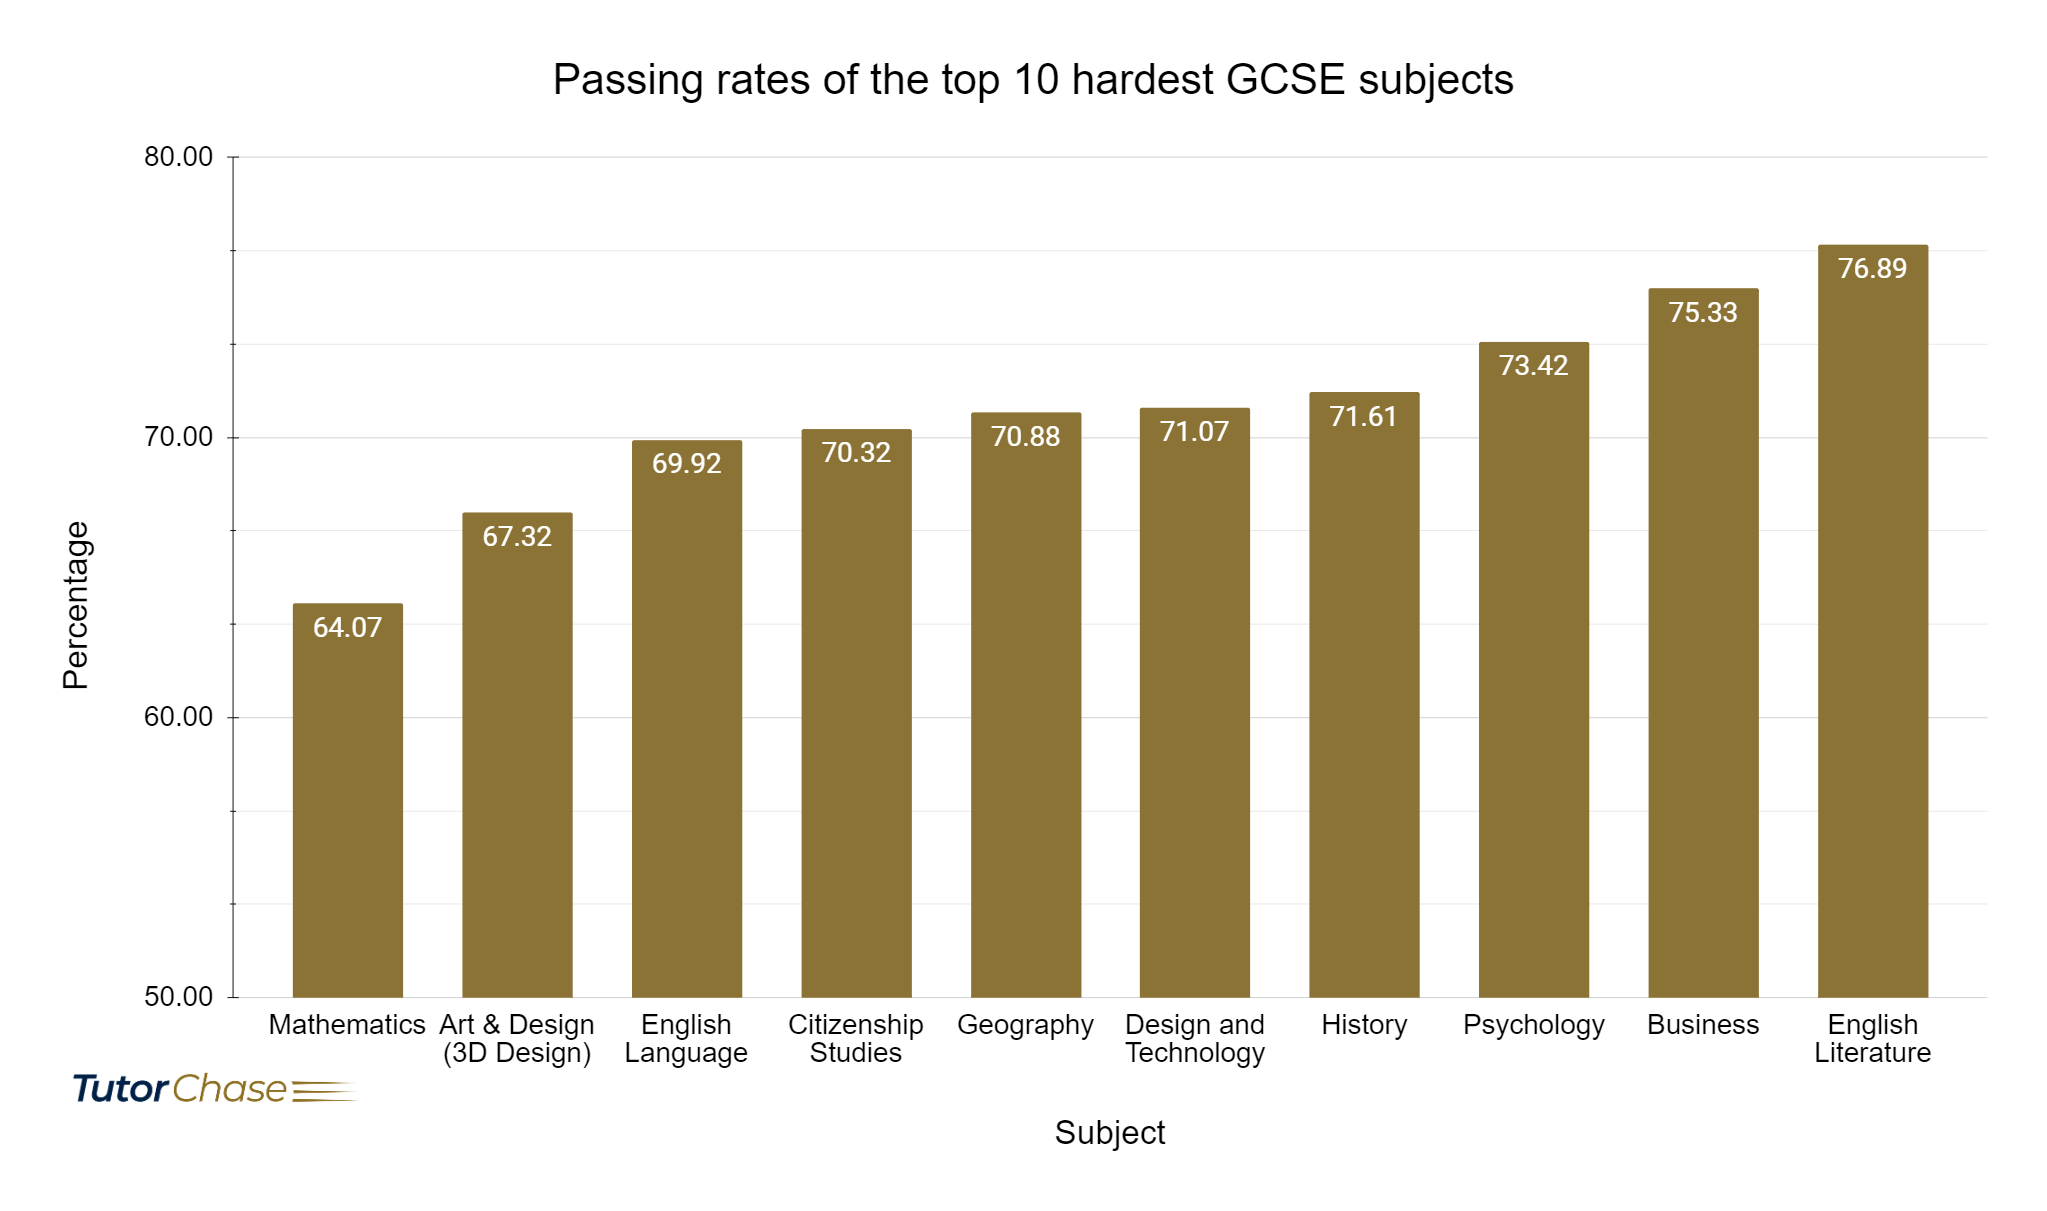 Passing rates of the top 10 hardest GCSE subjects